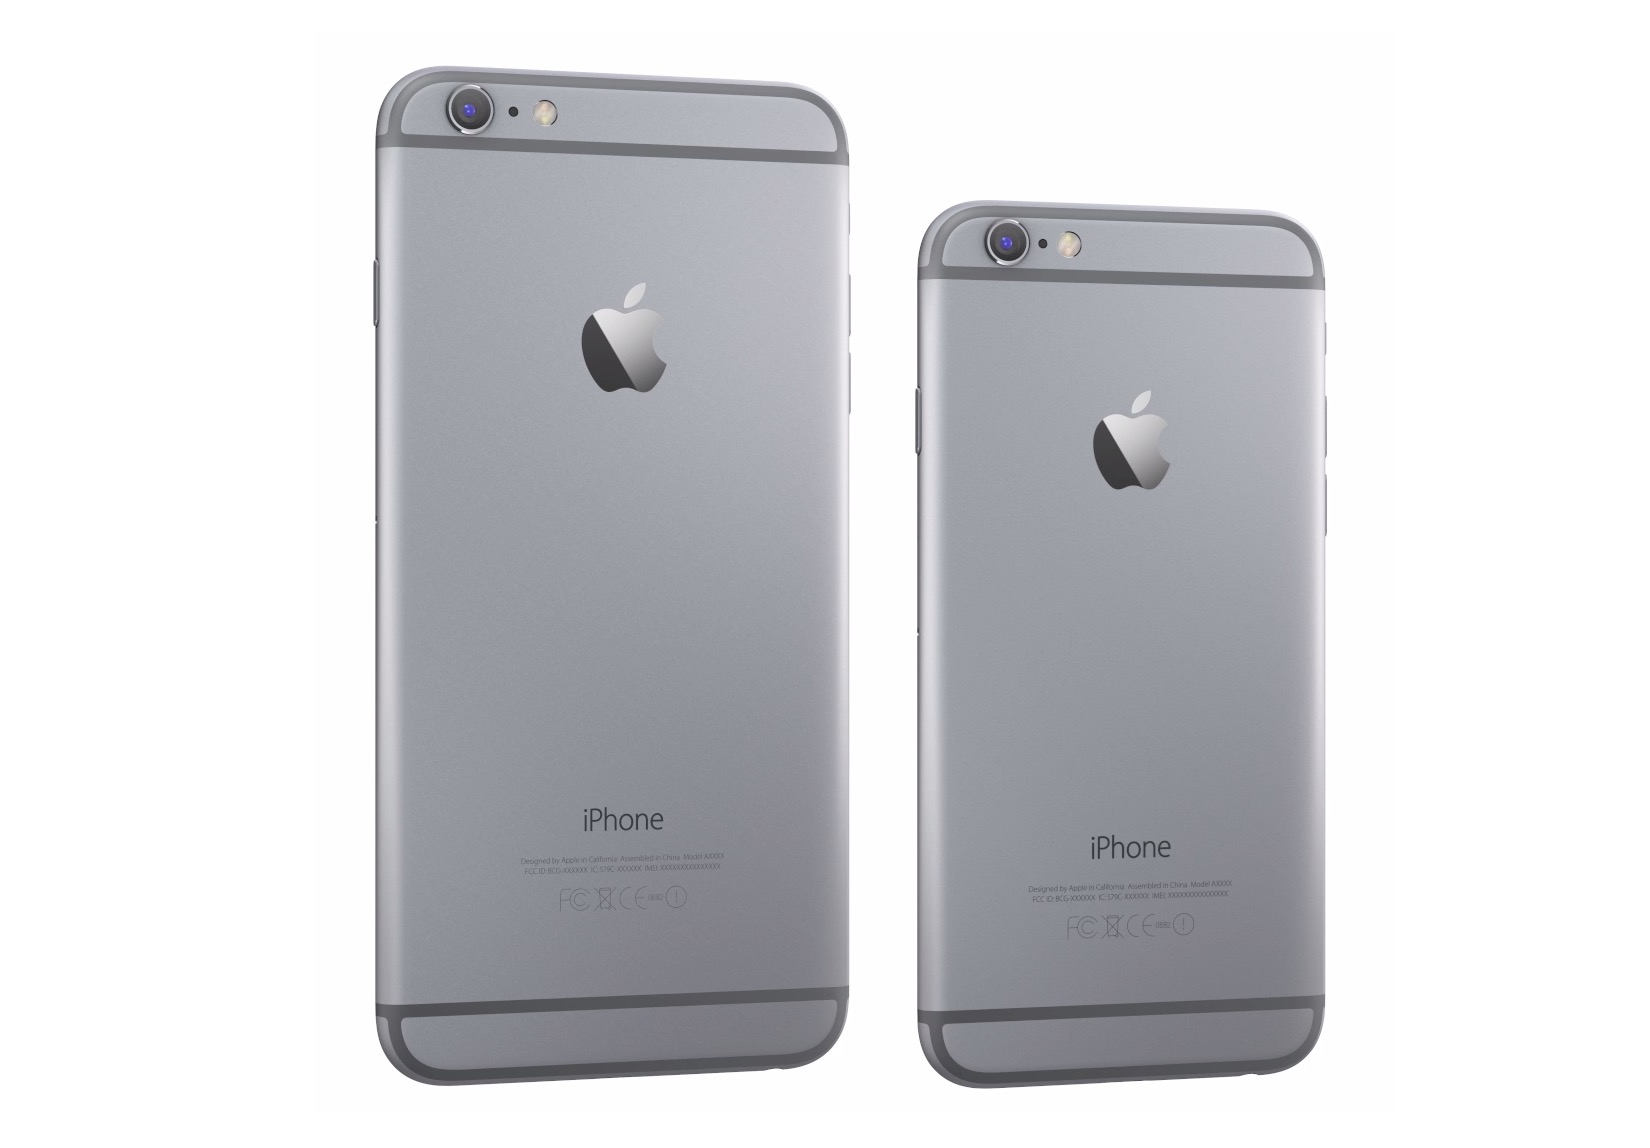 iPhone 6, iPhone 6 Plus & iPhone 5s no longer being sold, but you’ll still get updates thankfully